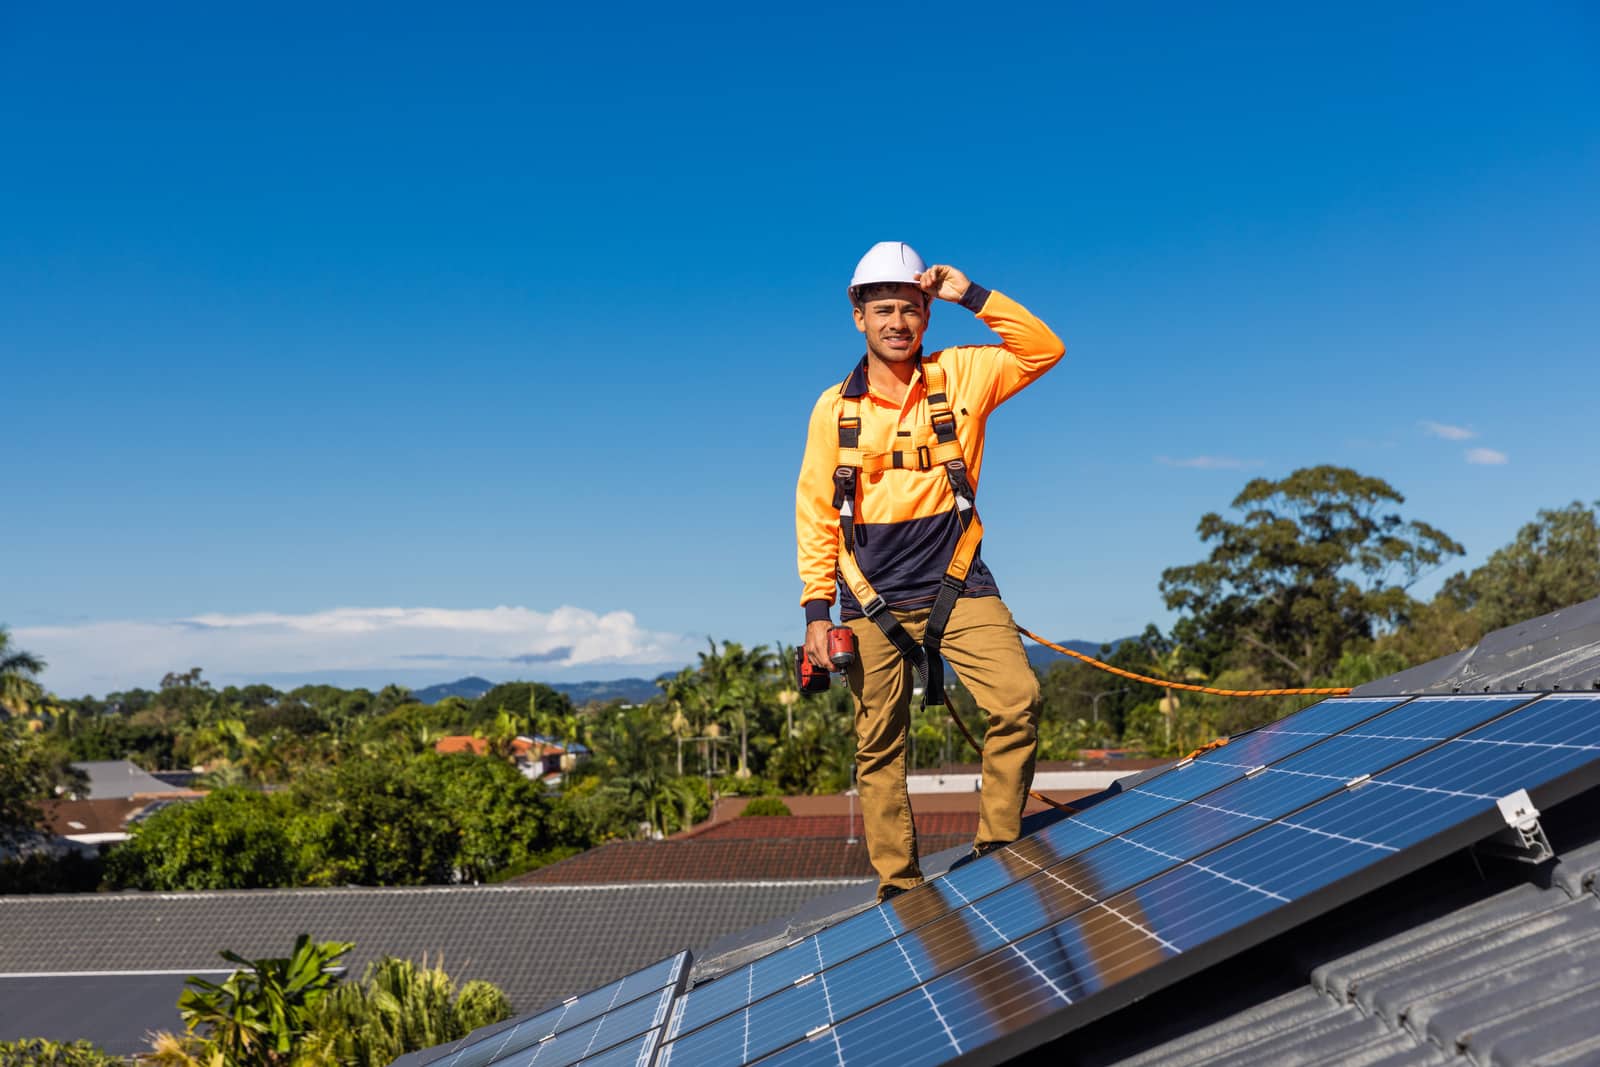 A Solar water wind employee standing on top of a roof next to the solar panels he has installed